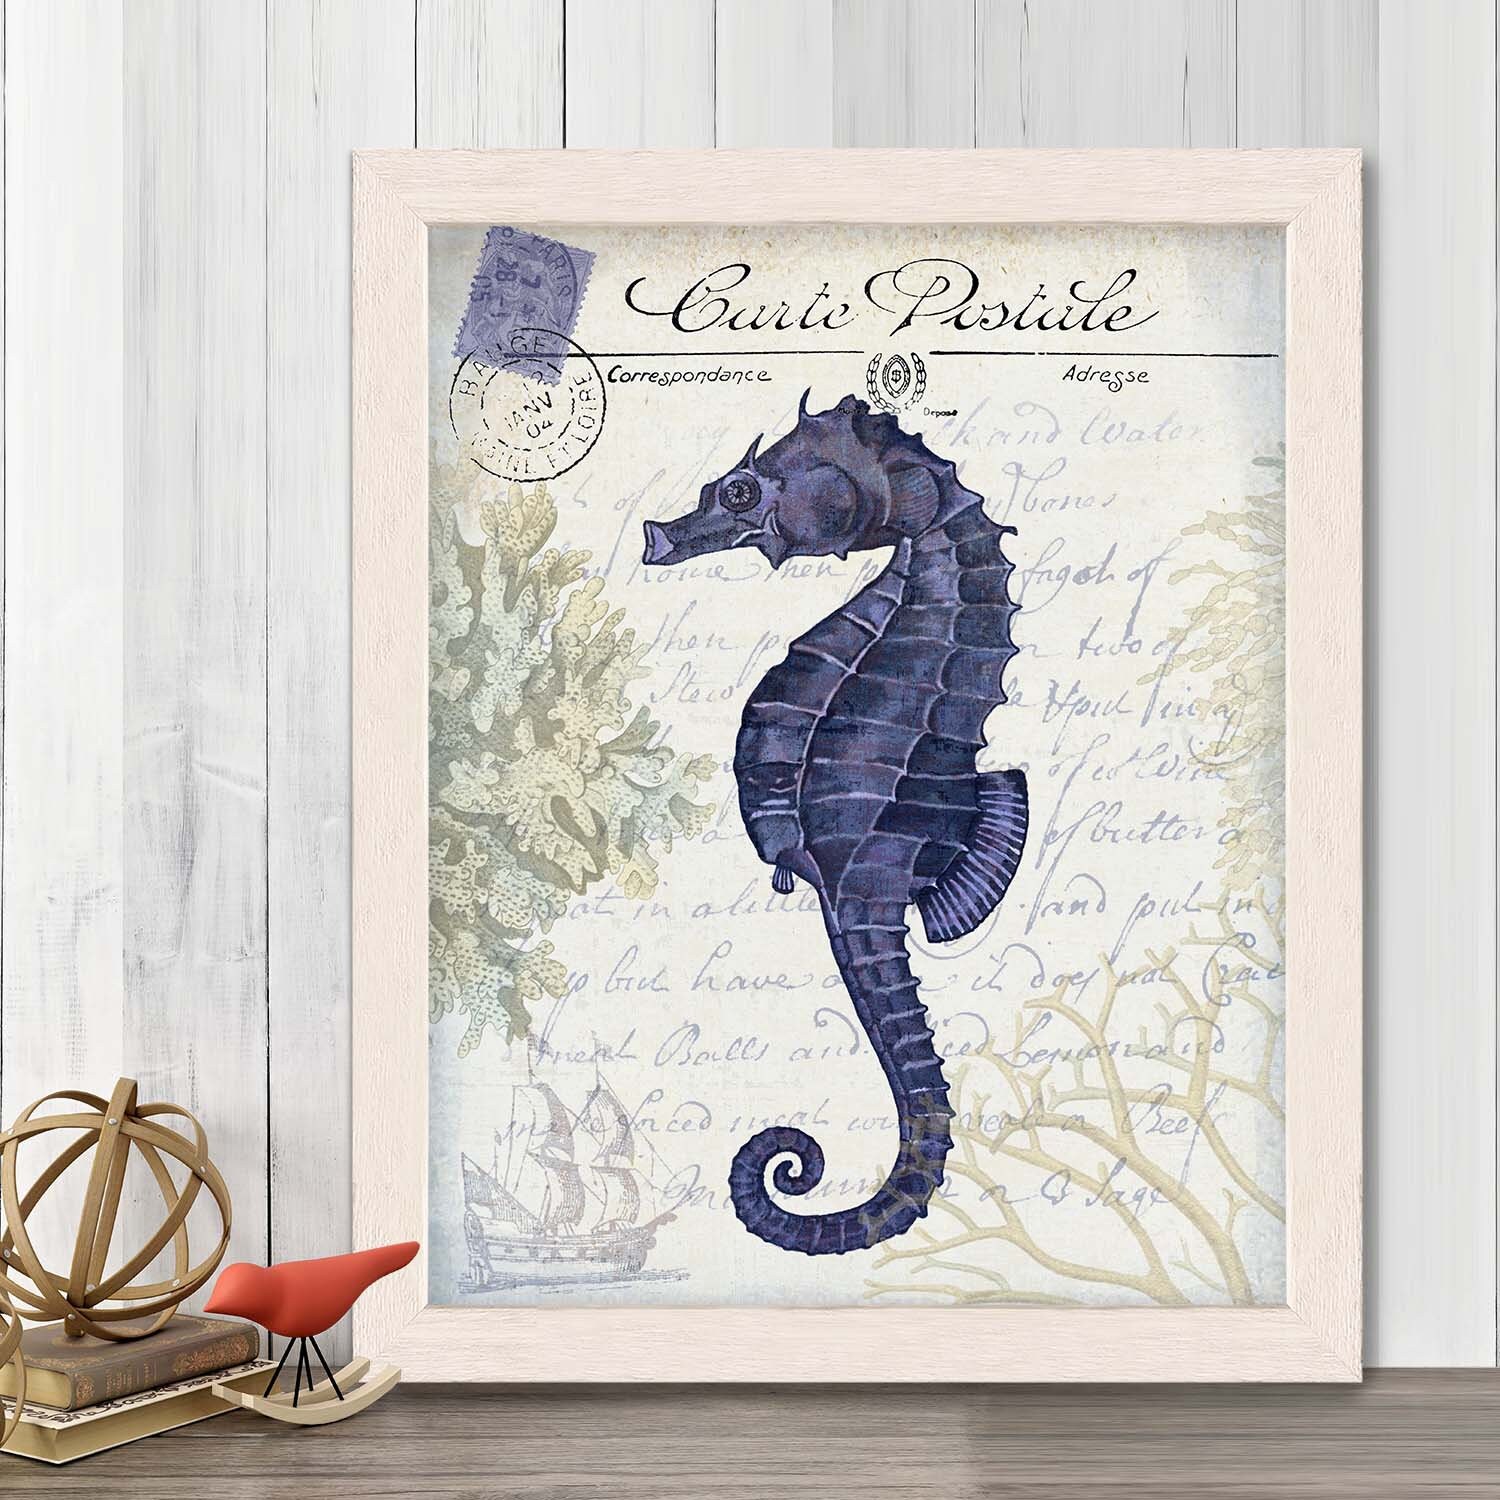 Limited Edition Paper Seahorse Letter Writing Kit - The Paper Seahorse